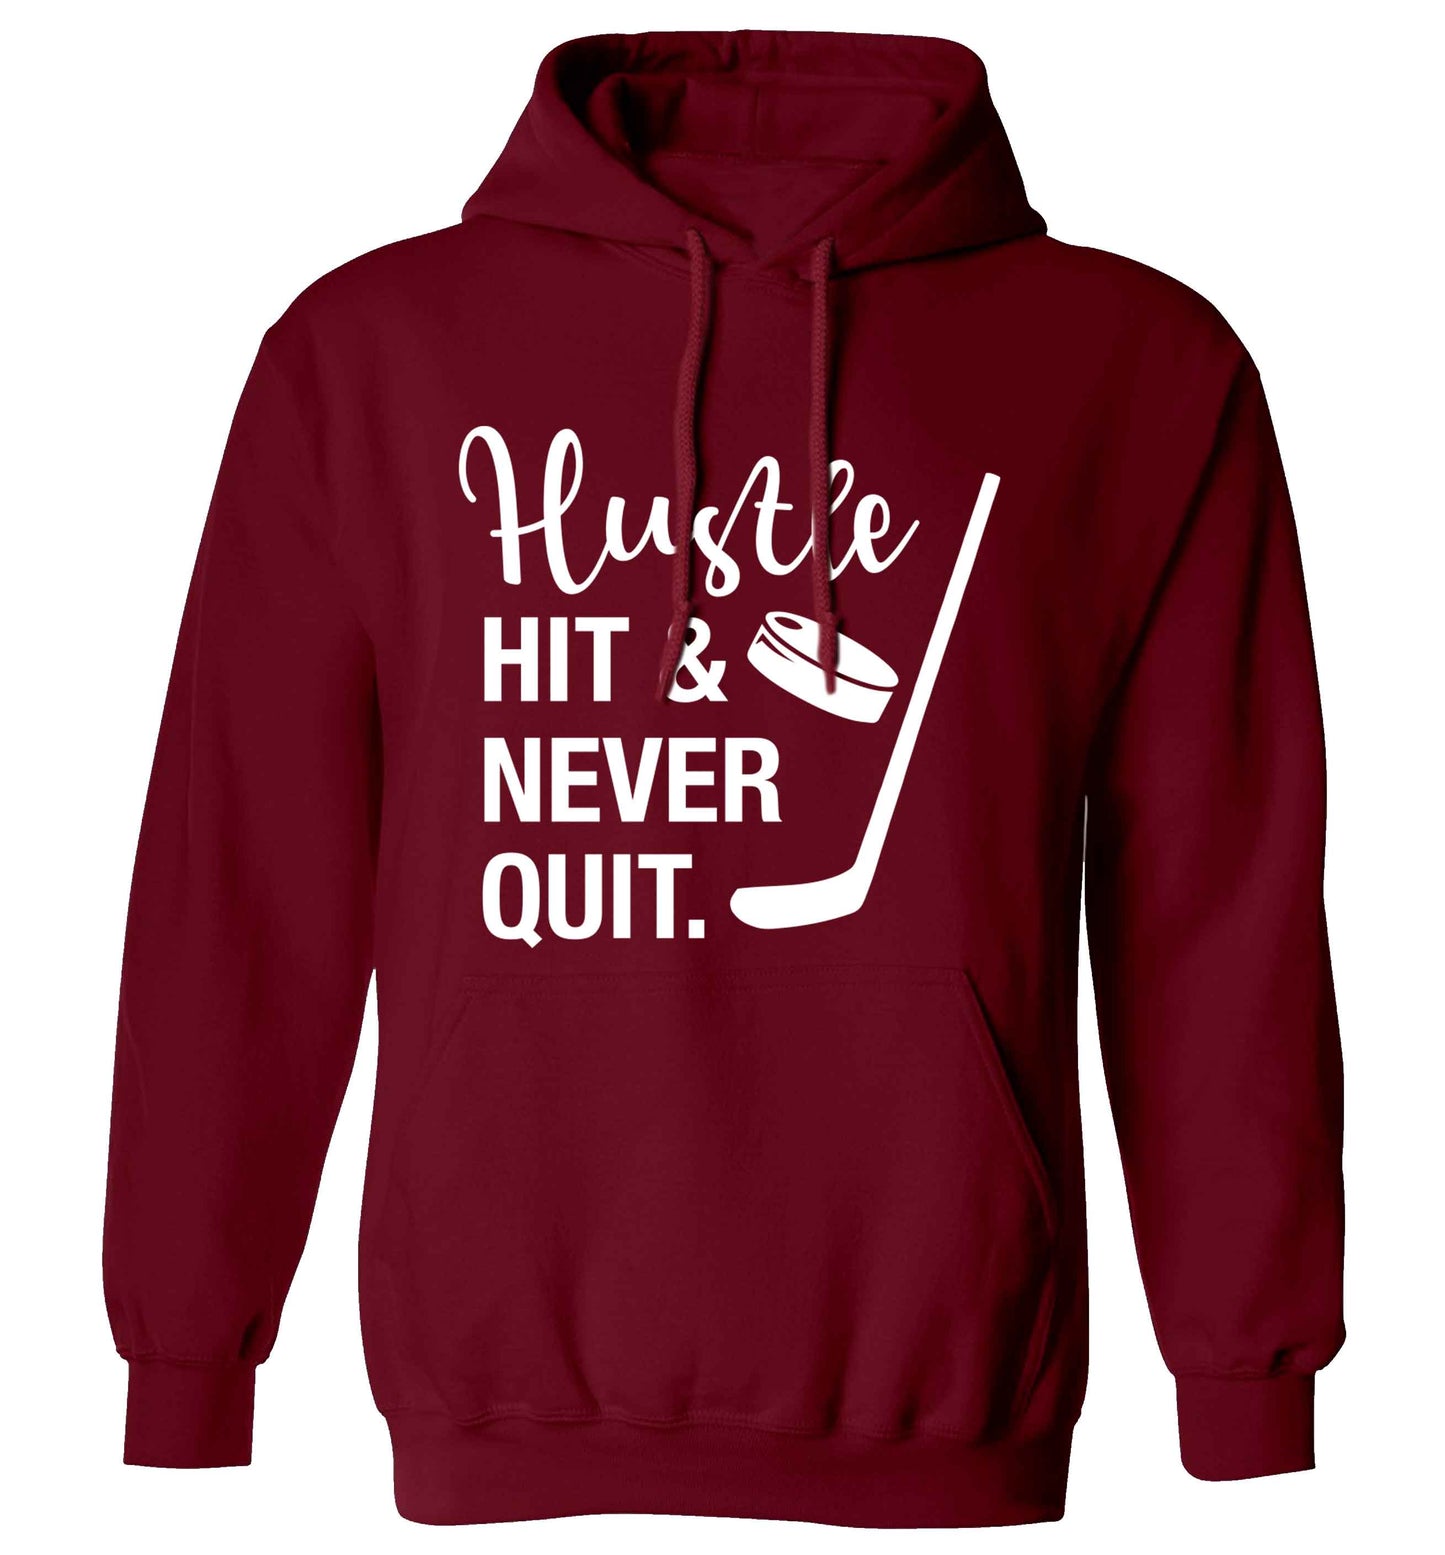 Hustle hit and never quit adults unisex maroon hoodie 2XL